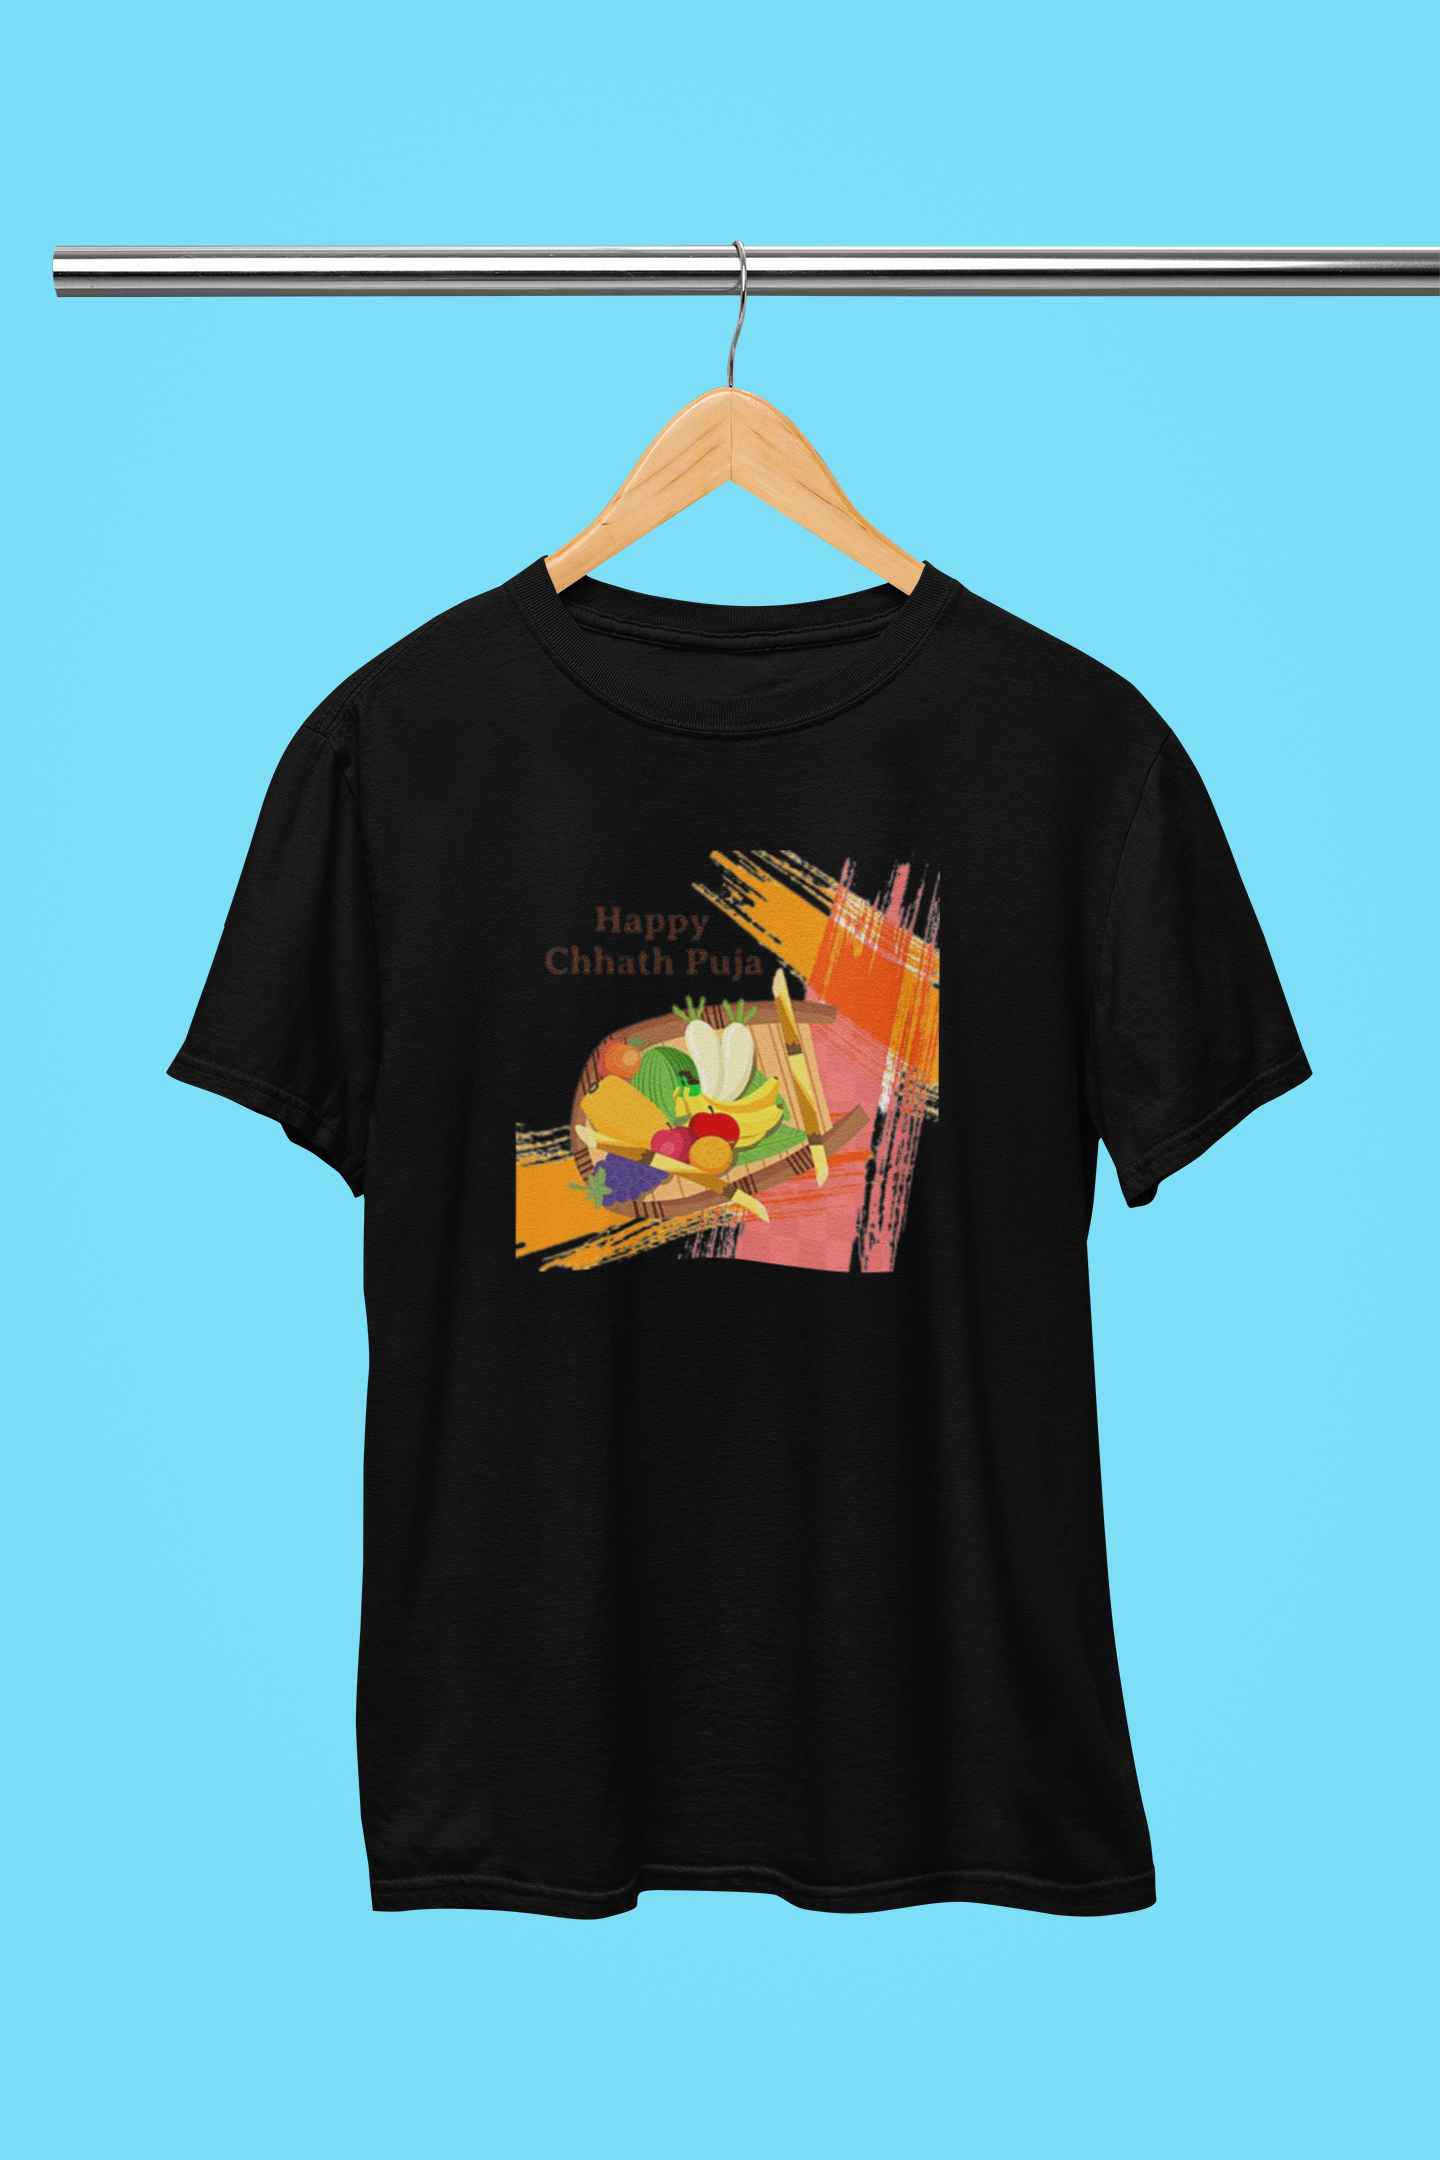 CHHATH PUJA SPECIAL T-SHIRT